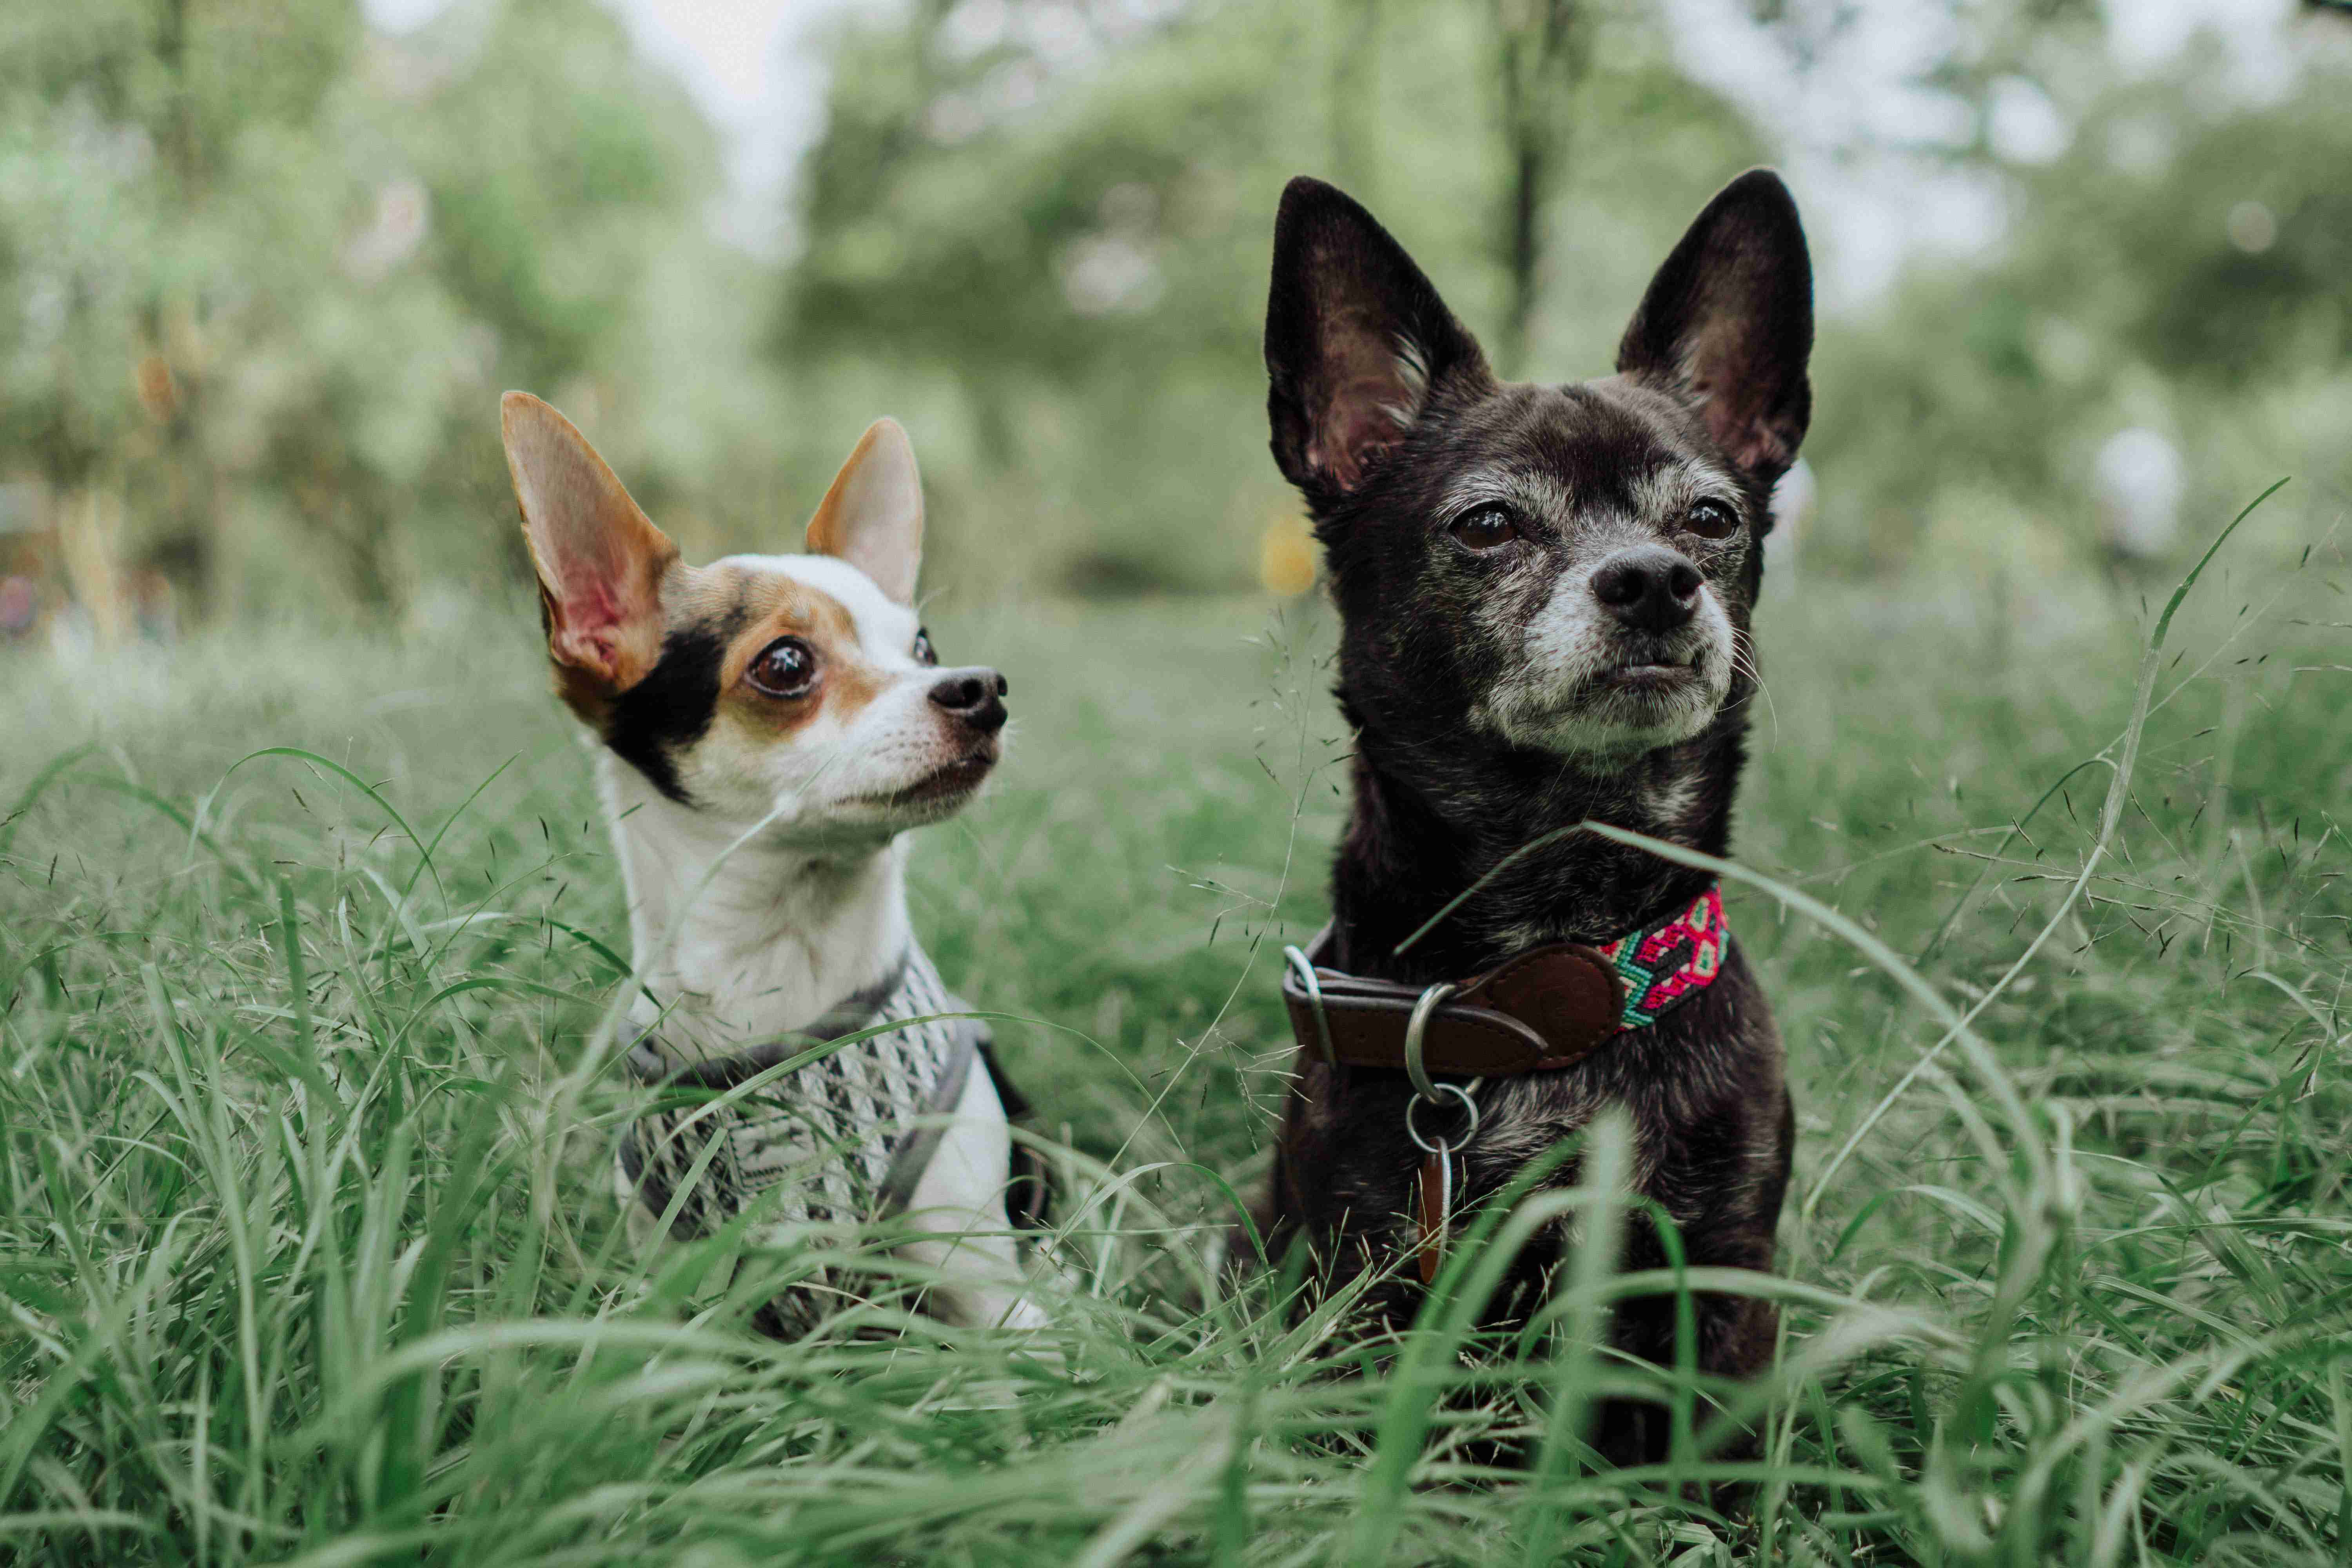 What are some effective ways to redirect a Chihuahua's aggression towards positive behaviors?